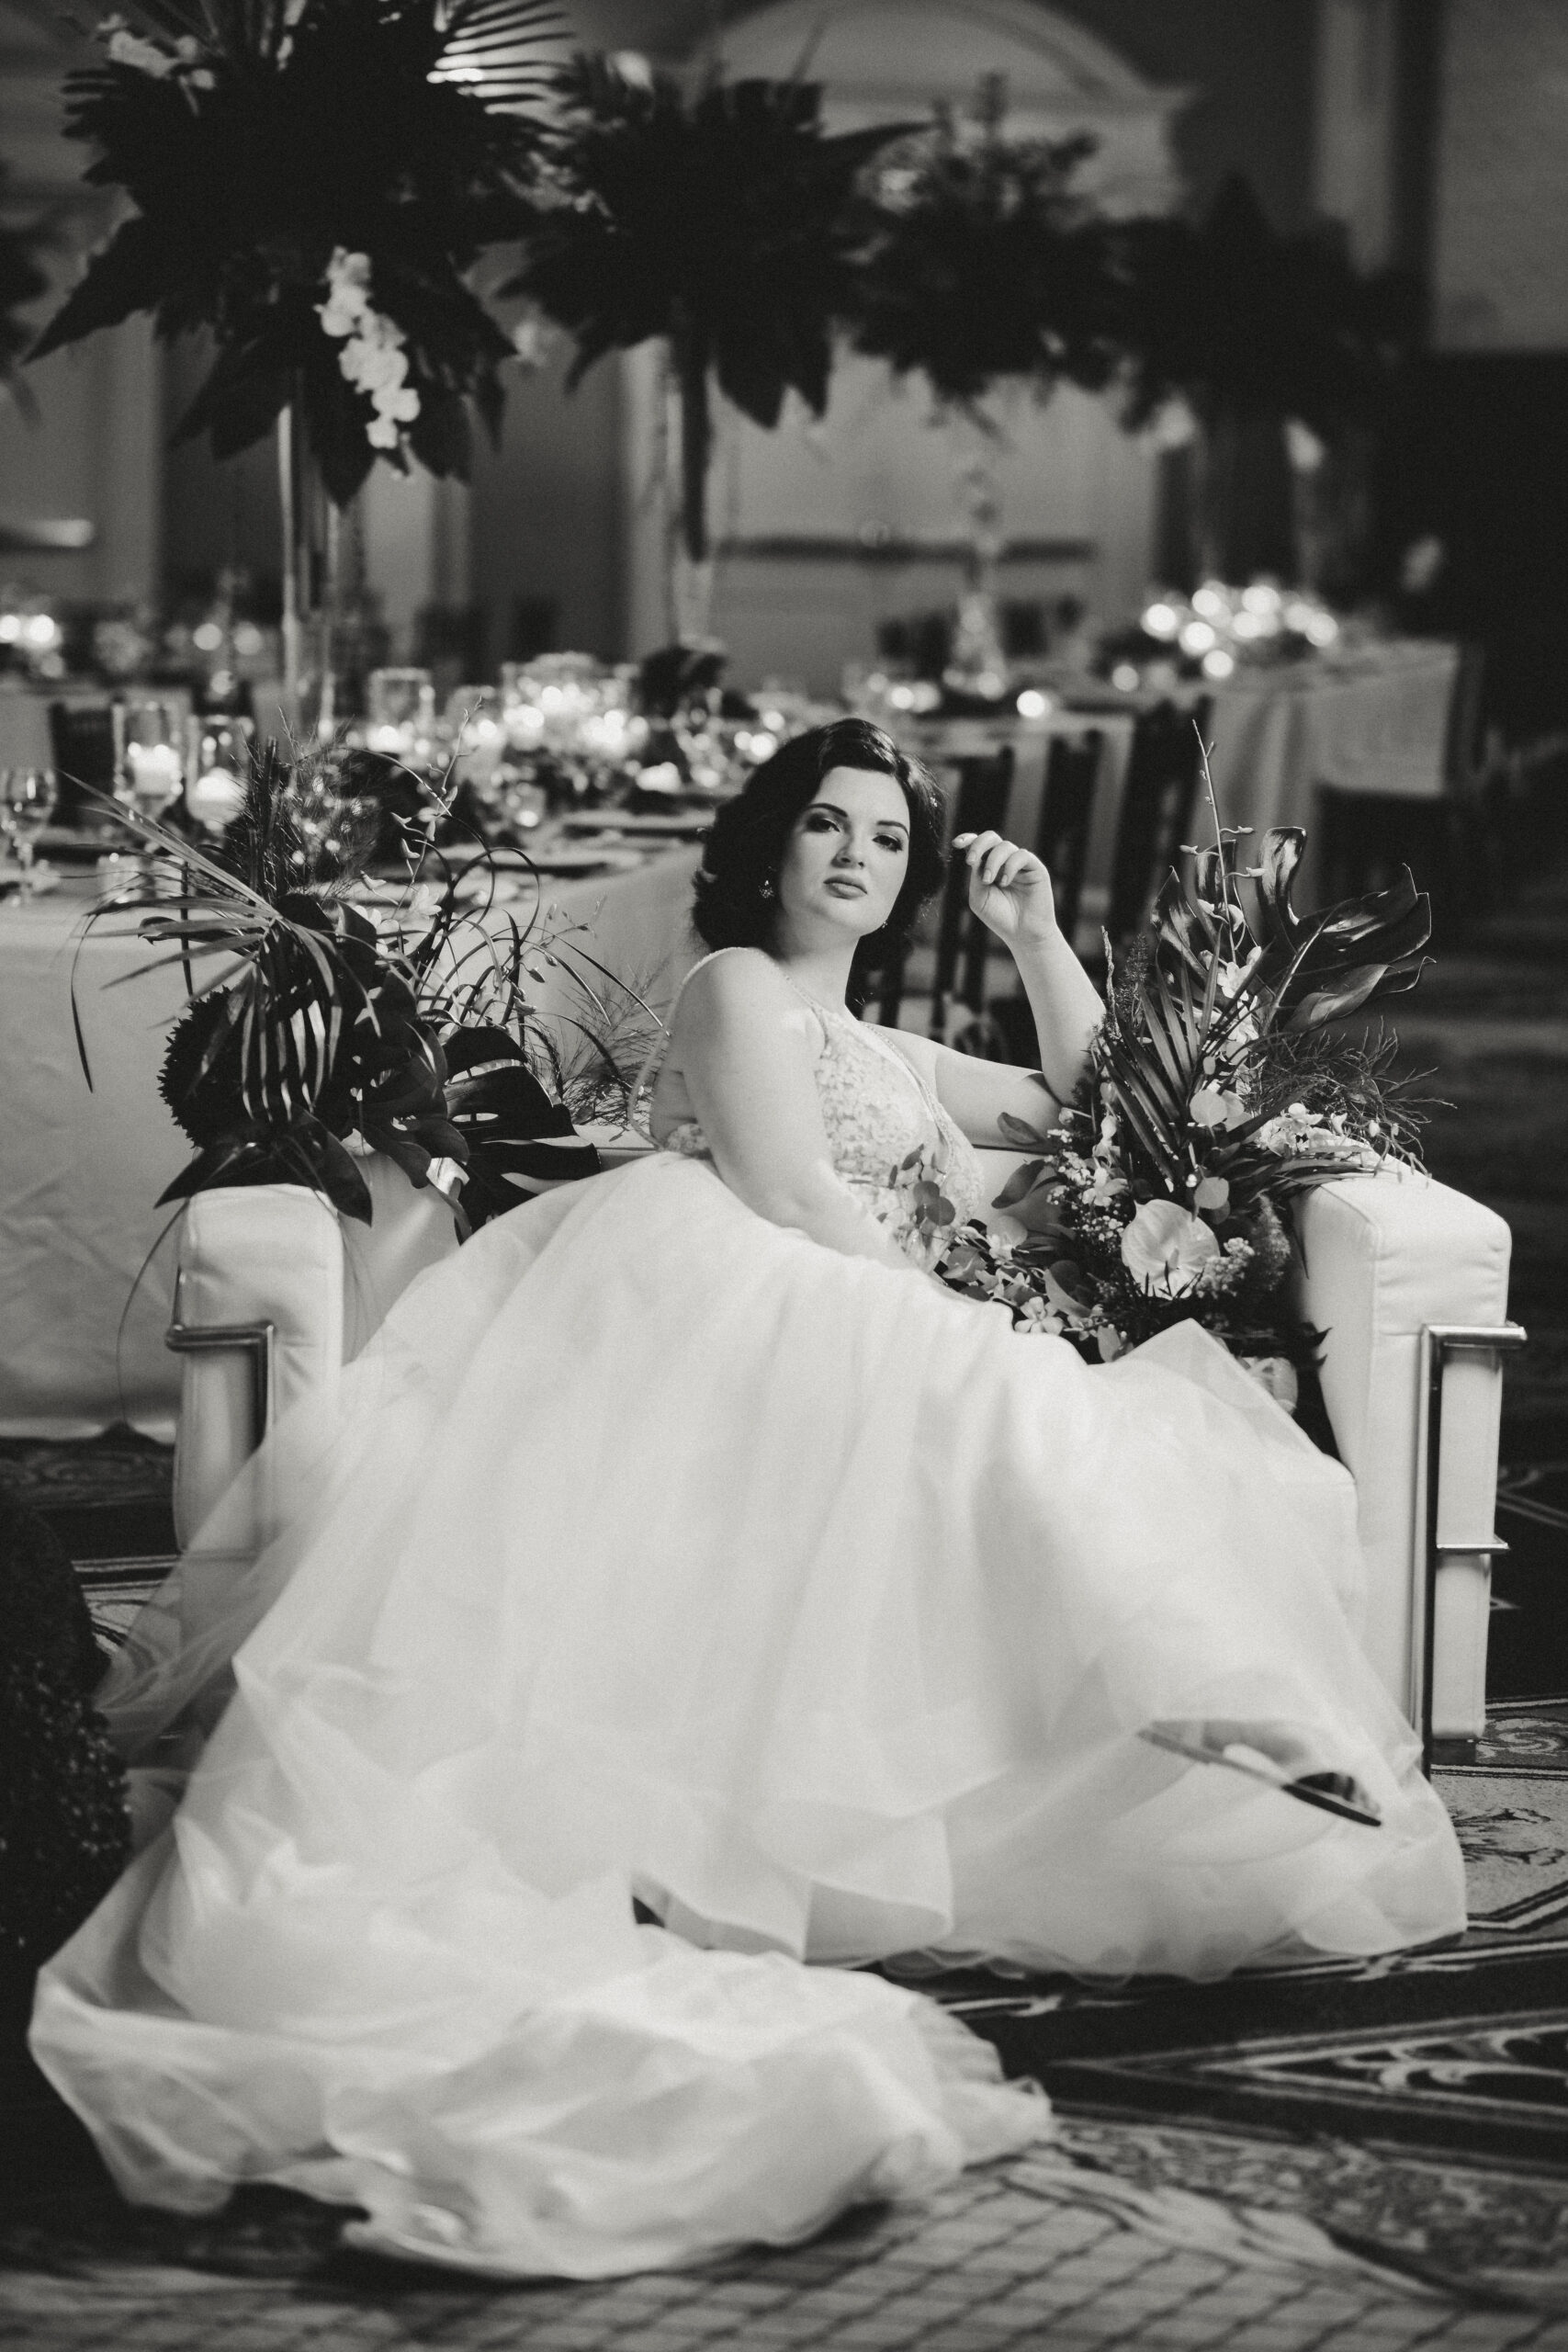 Styled Shoot | Old Hollywood Glamour Meets Vintage Miami